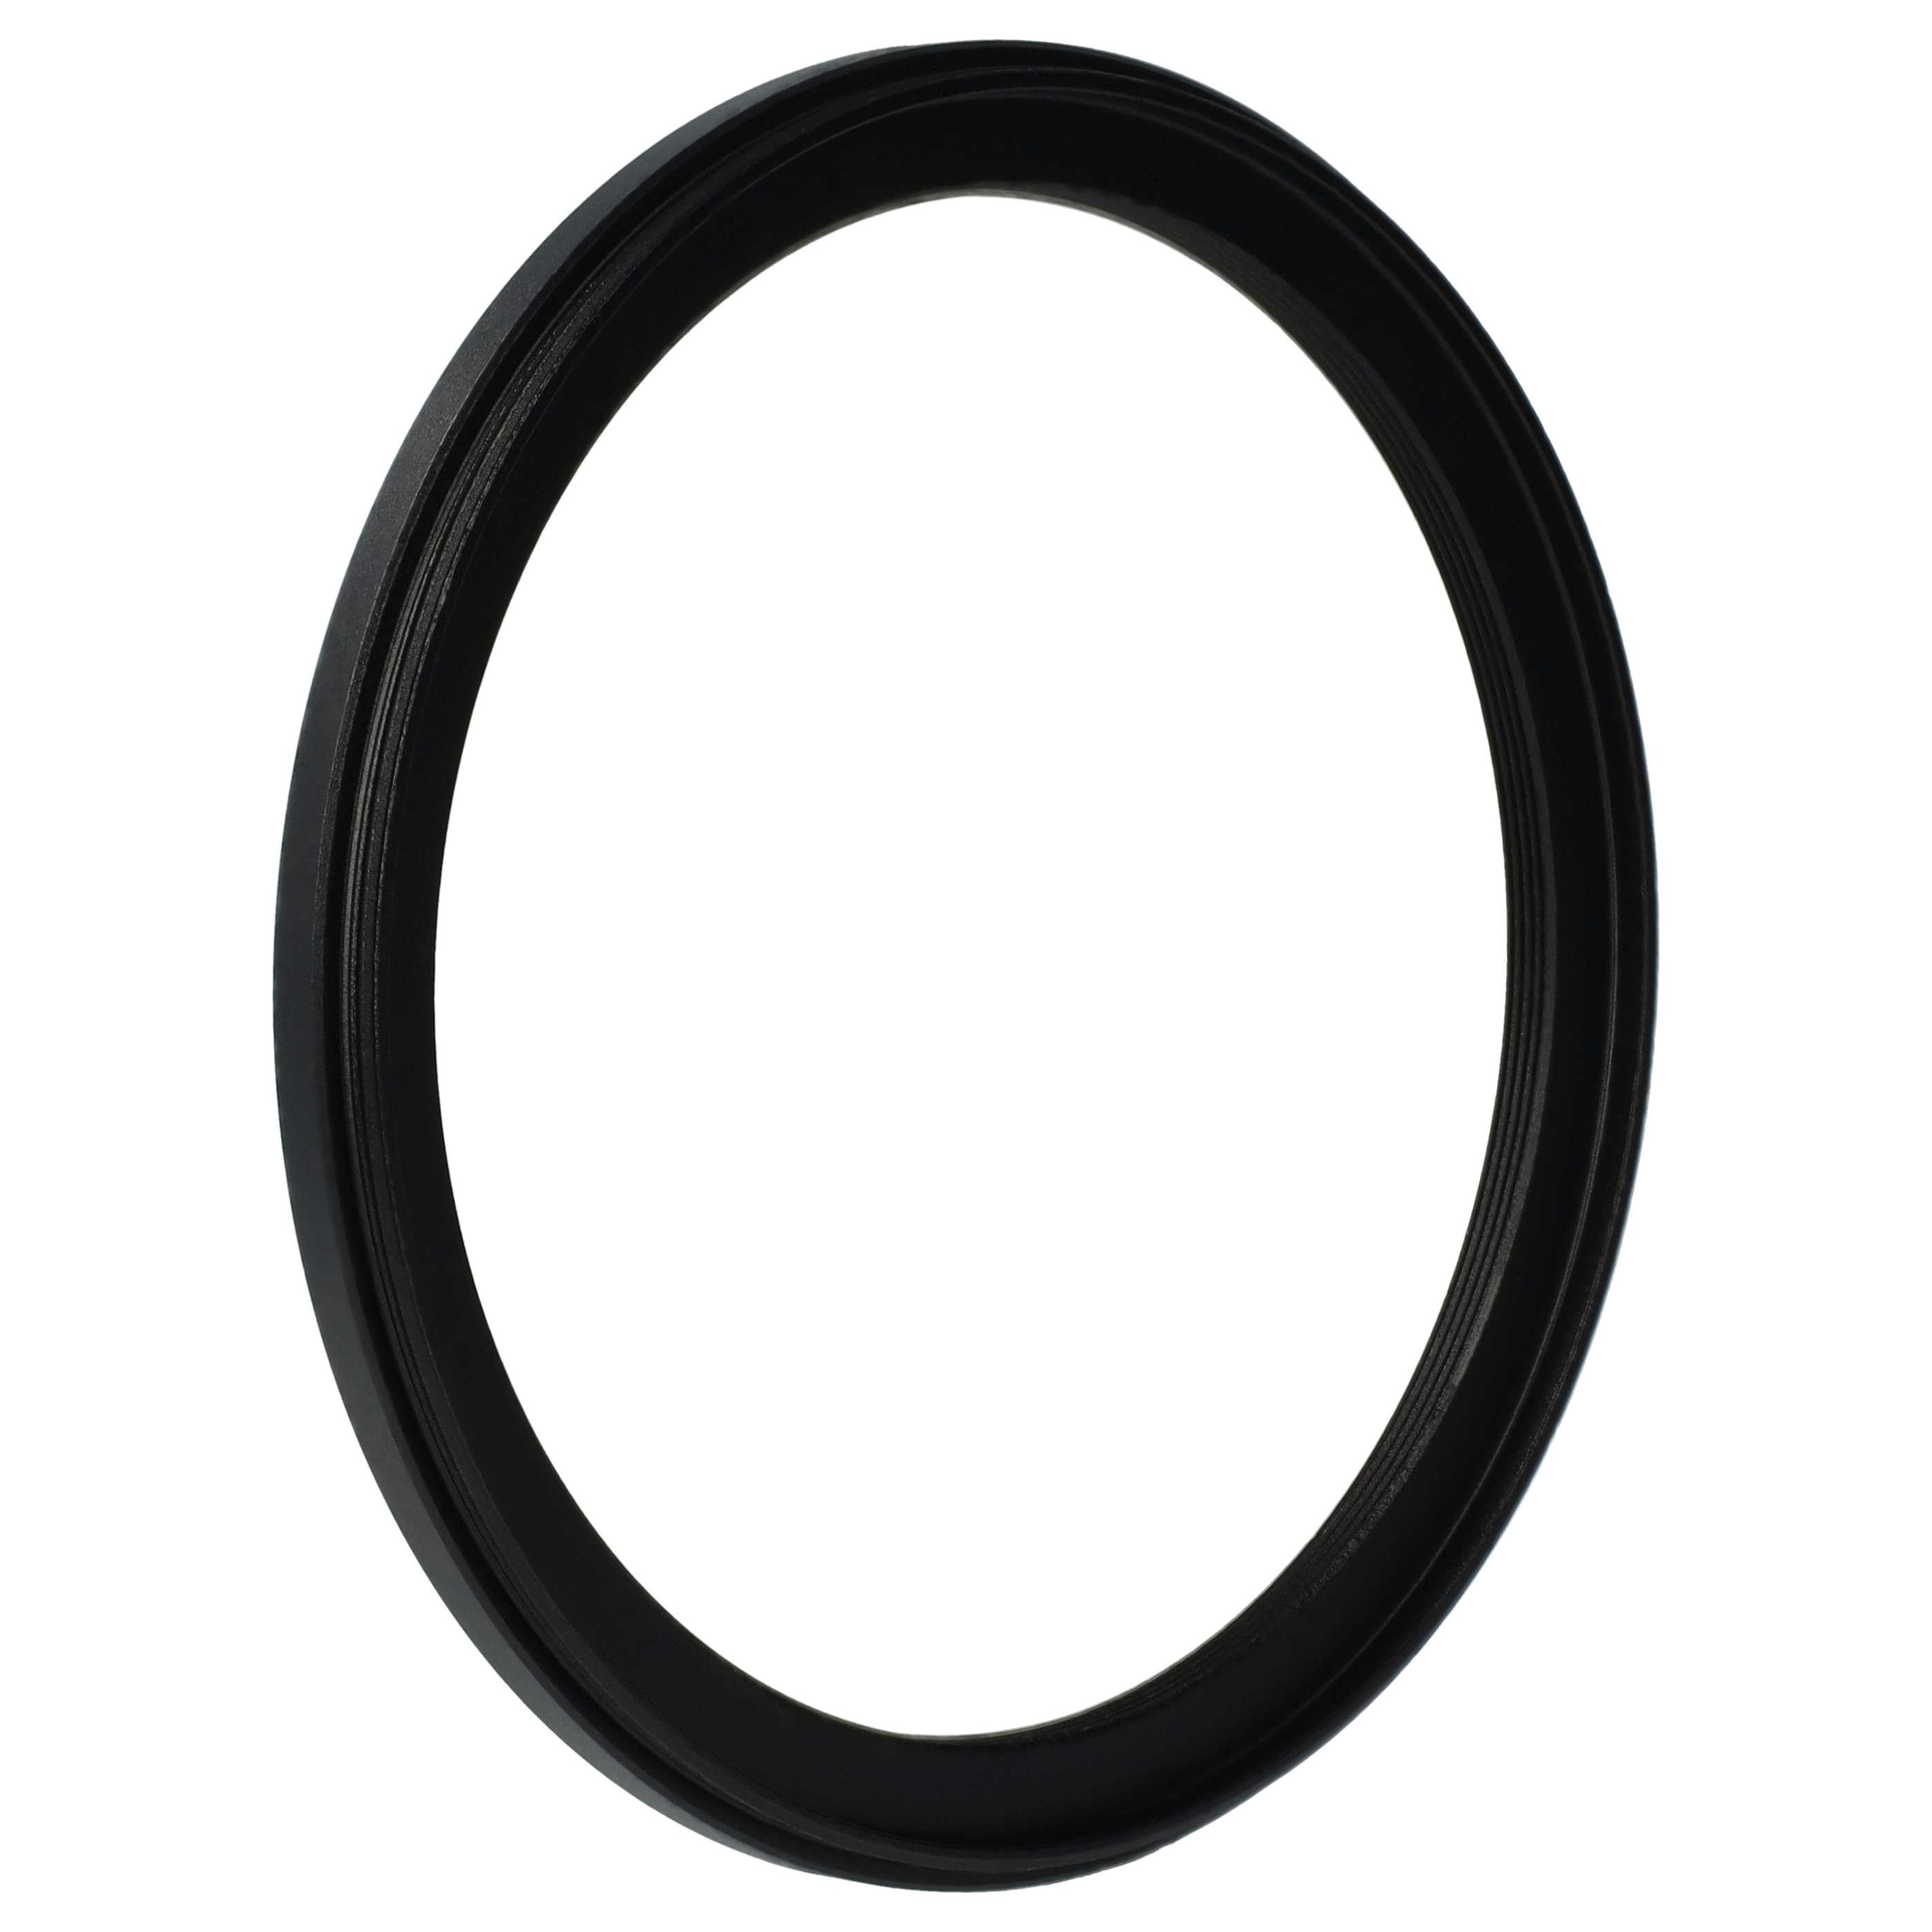 Step-Down Ring Adapter from 95 mm to 82 mm suitable for Camera Lens - Filter Adapter, metal